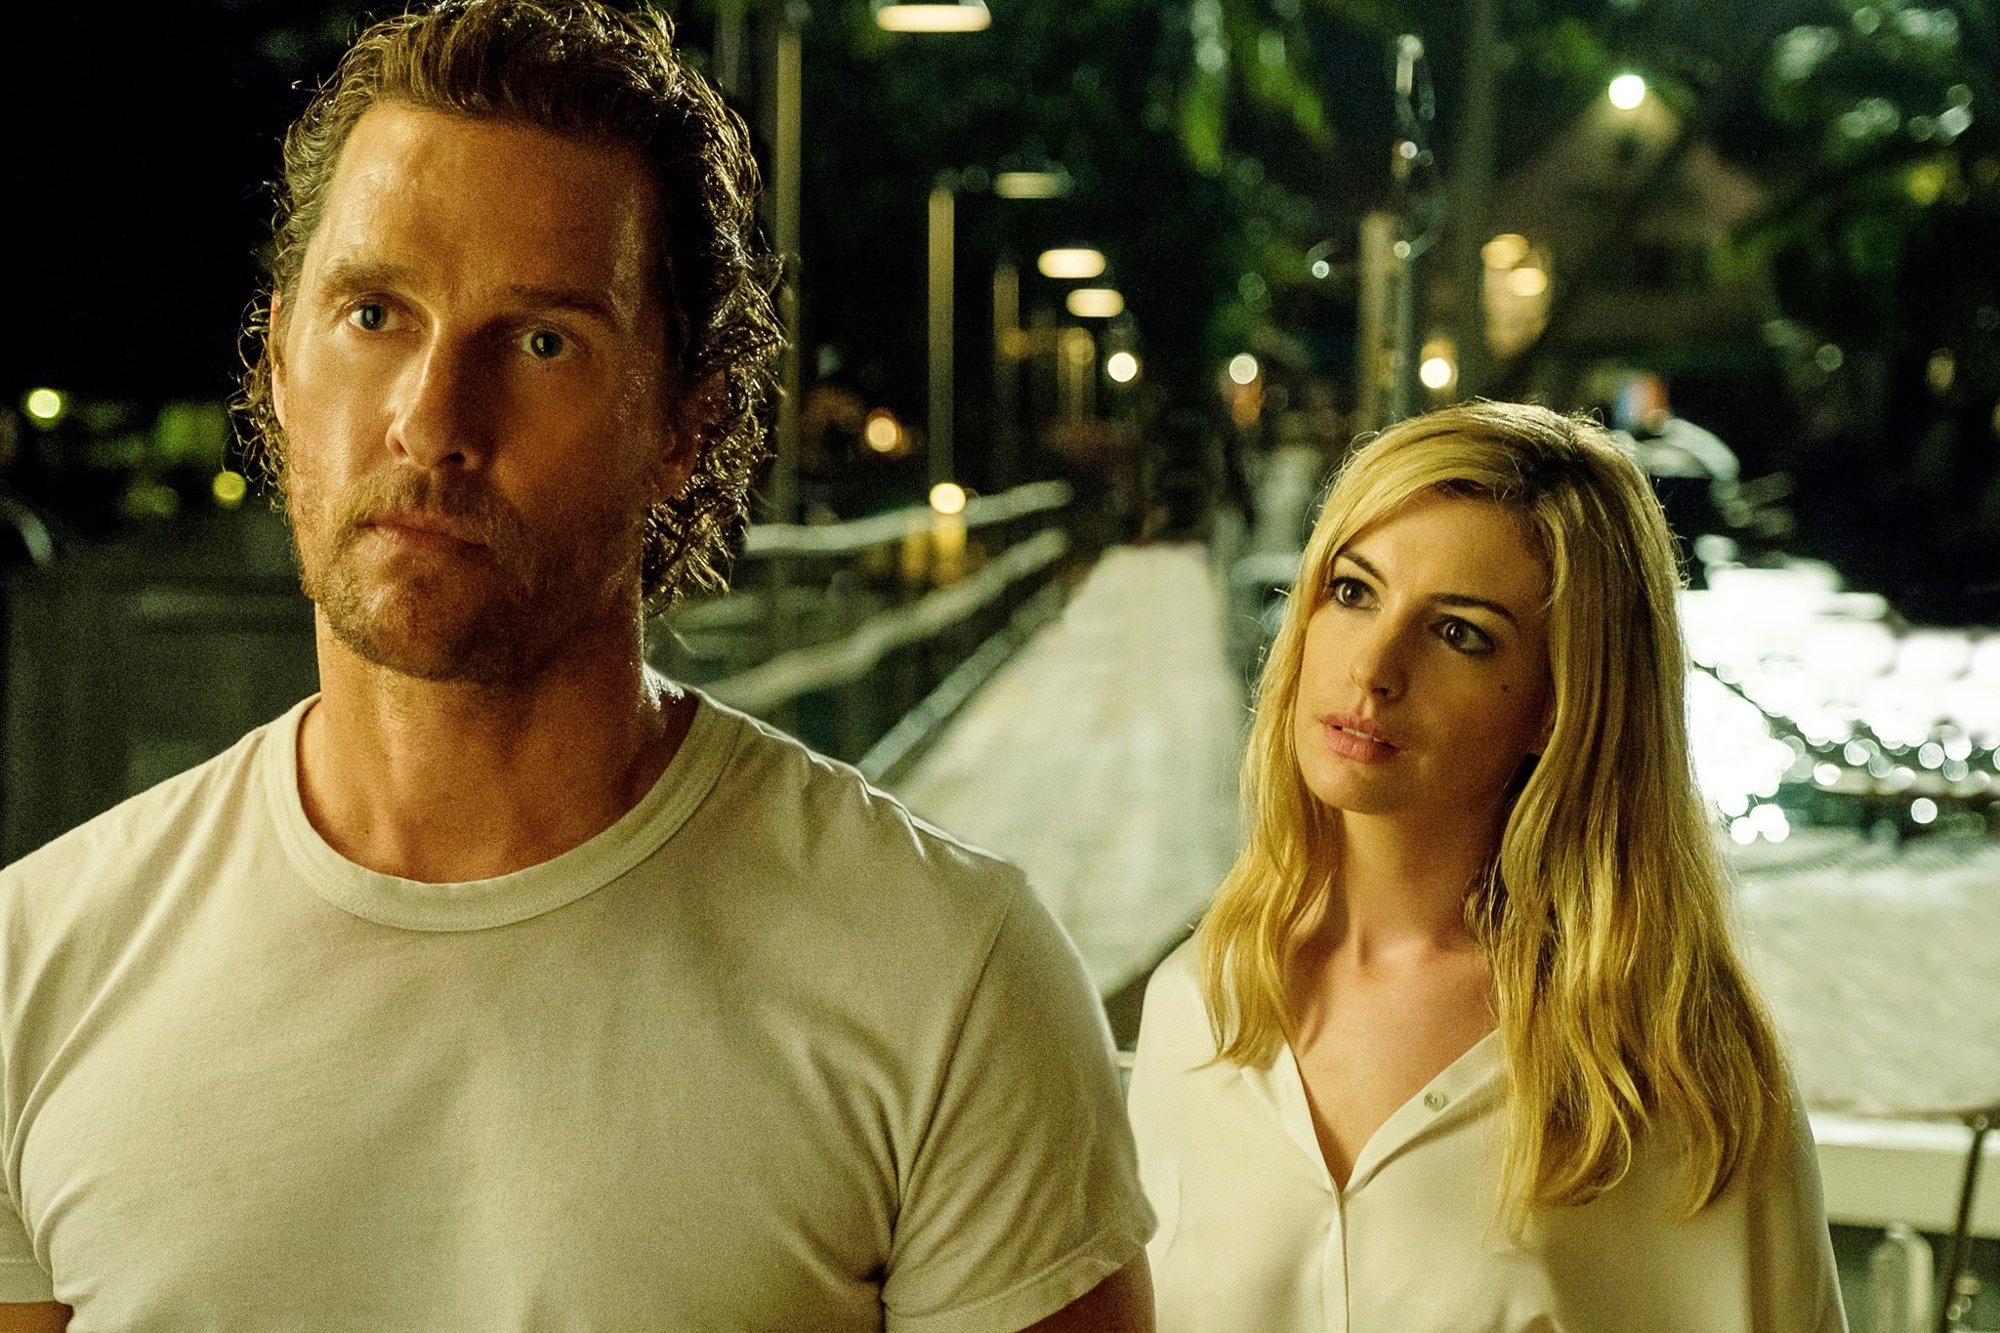 Matthew McConaughey and Anne Hathaway in IM Global's Serenity (2018)